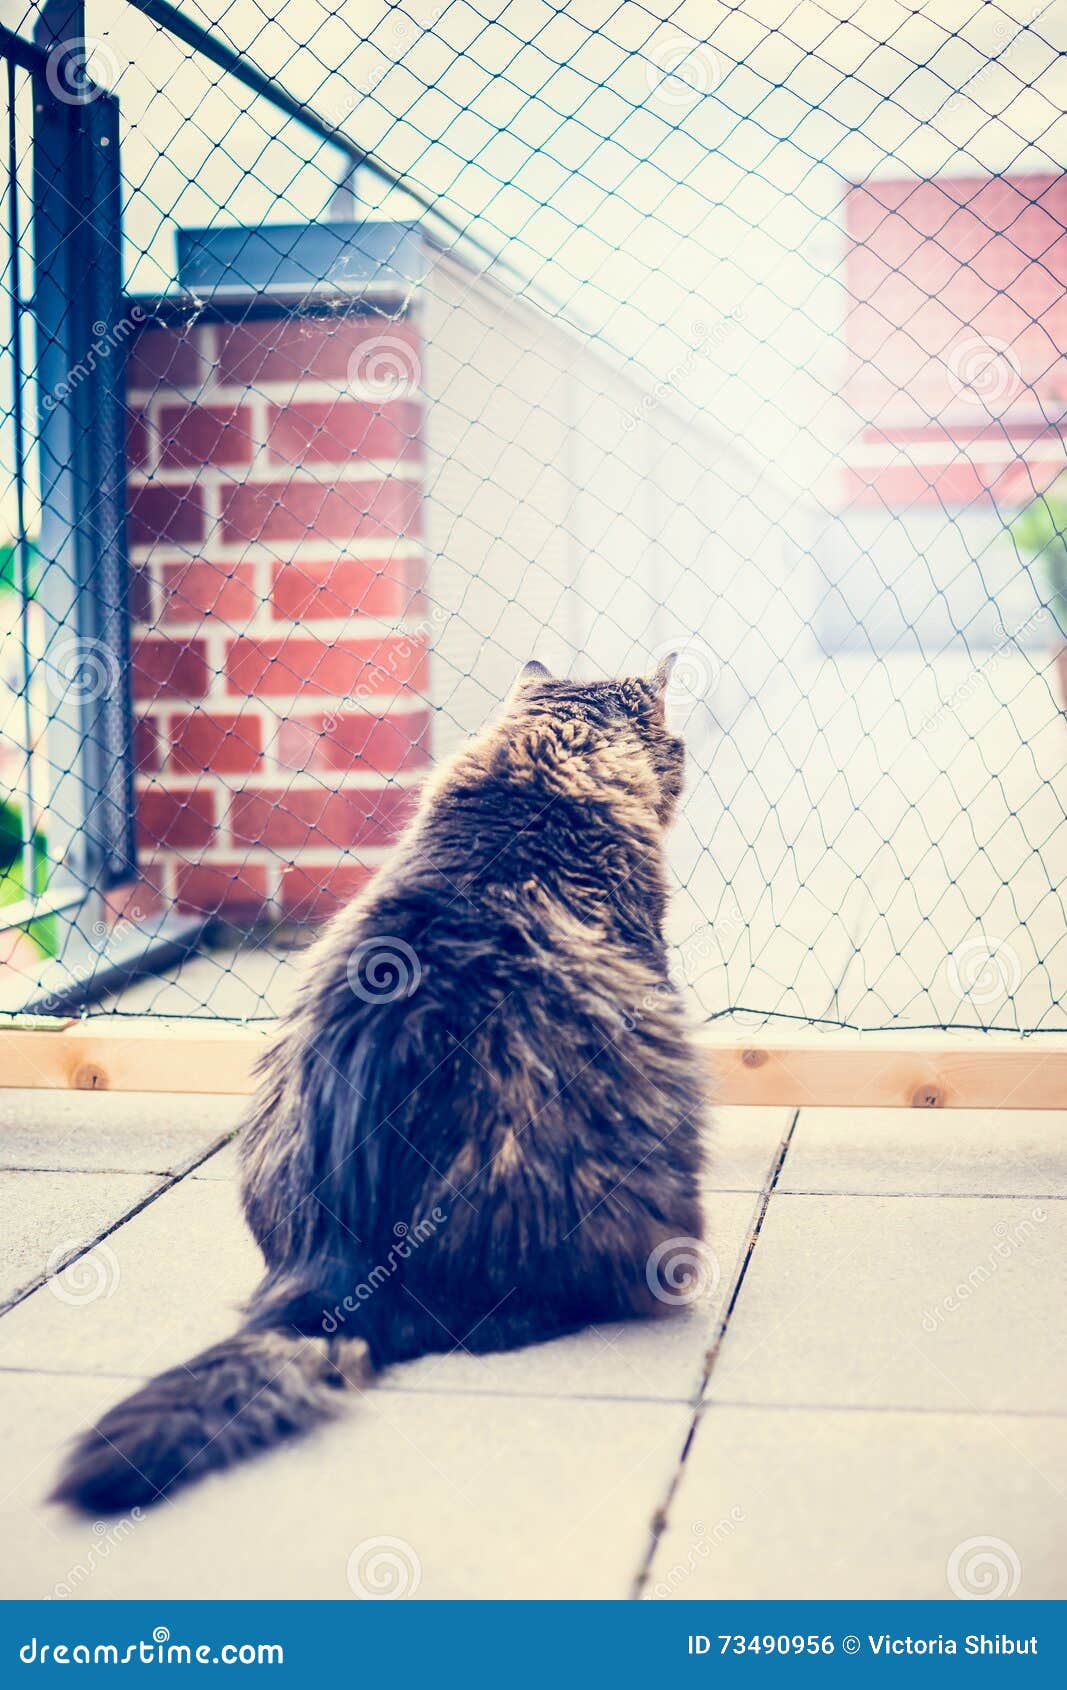 Domestic Cat Sits in Front of Net on Balcony . Cat Netting. Outdoor Cat ...